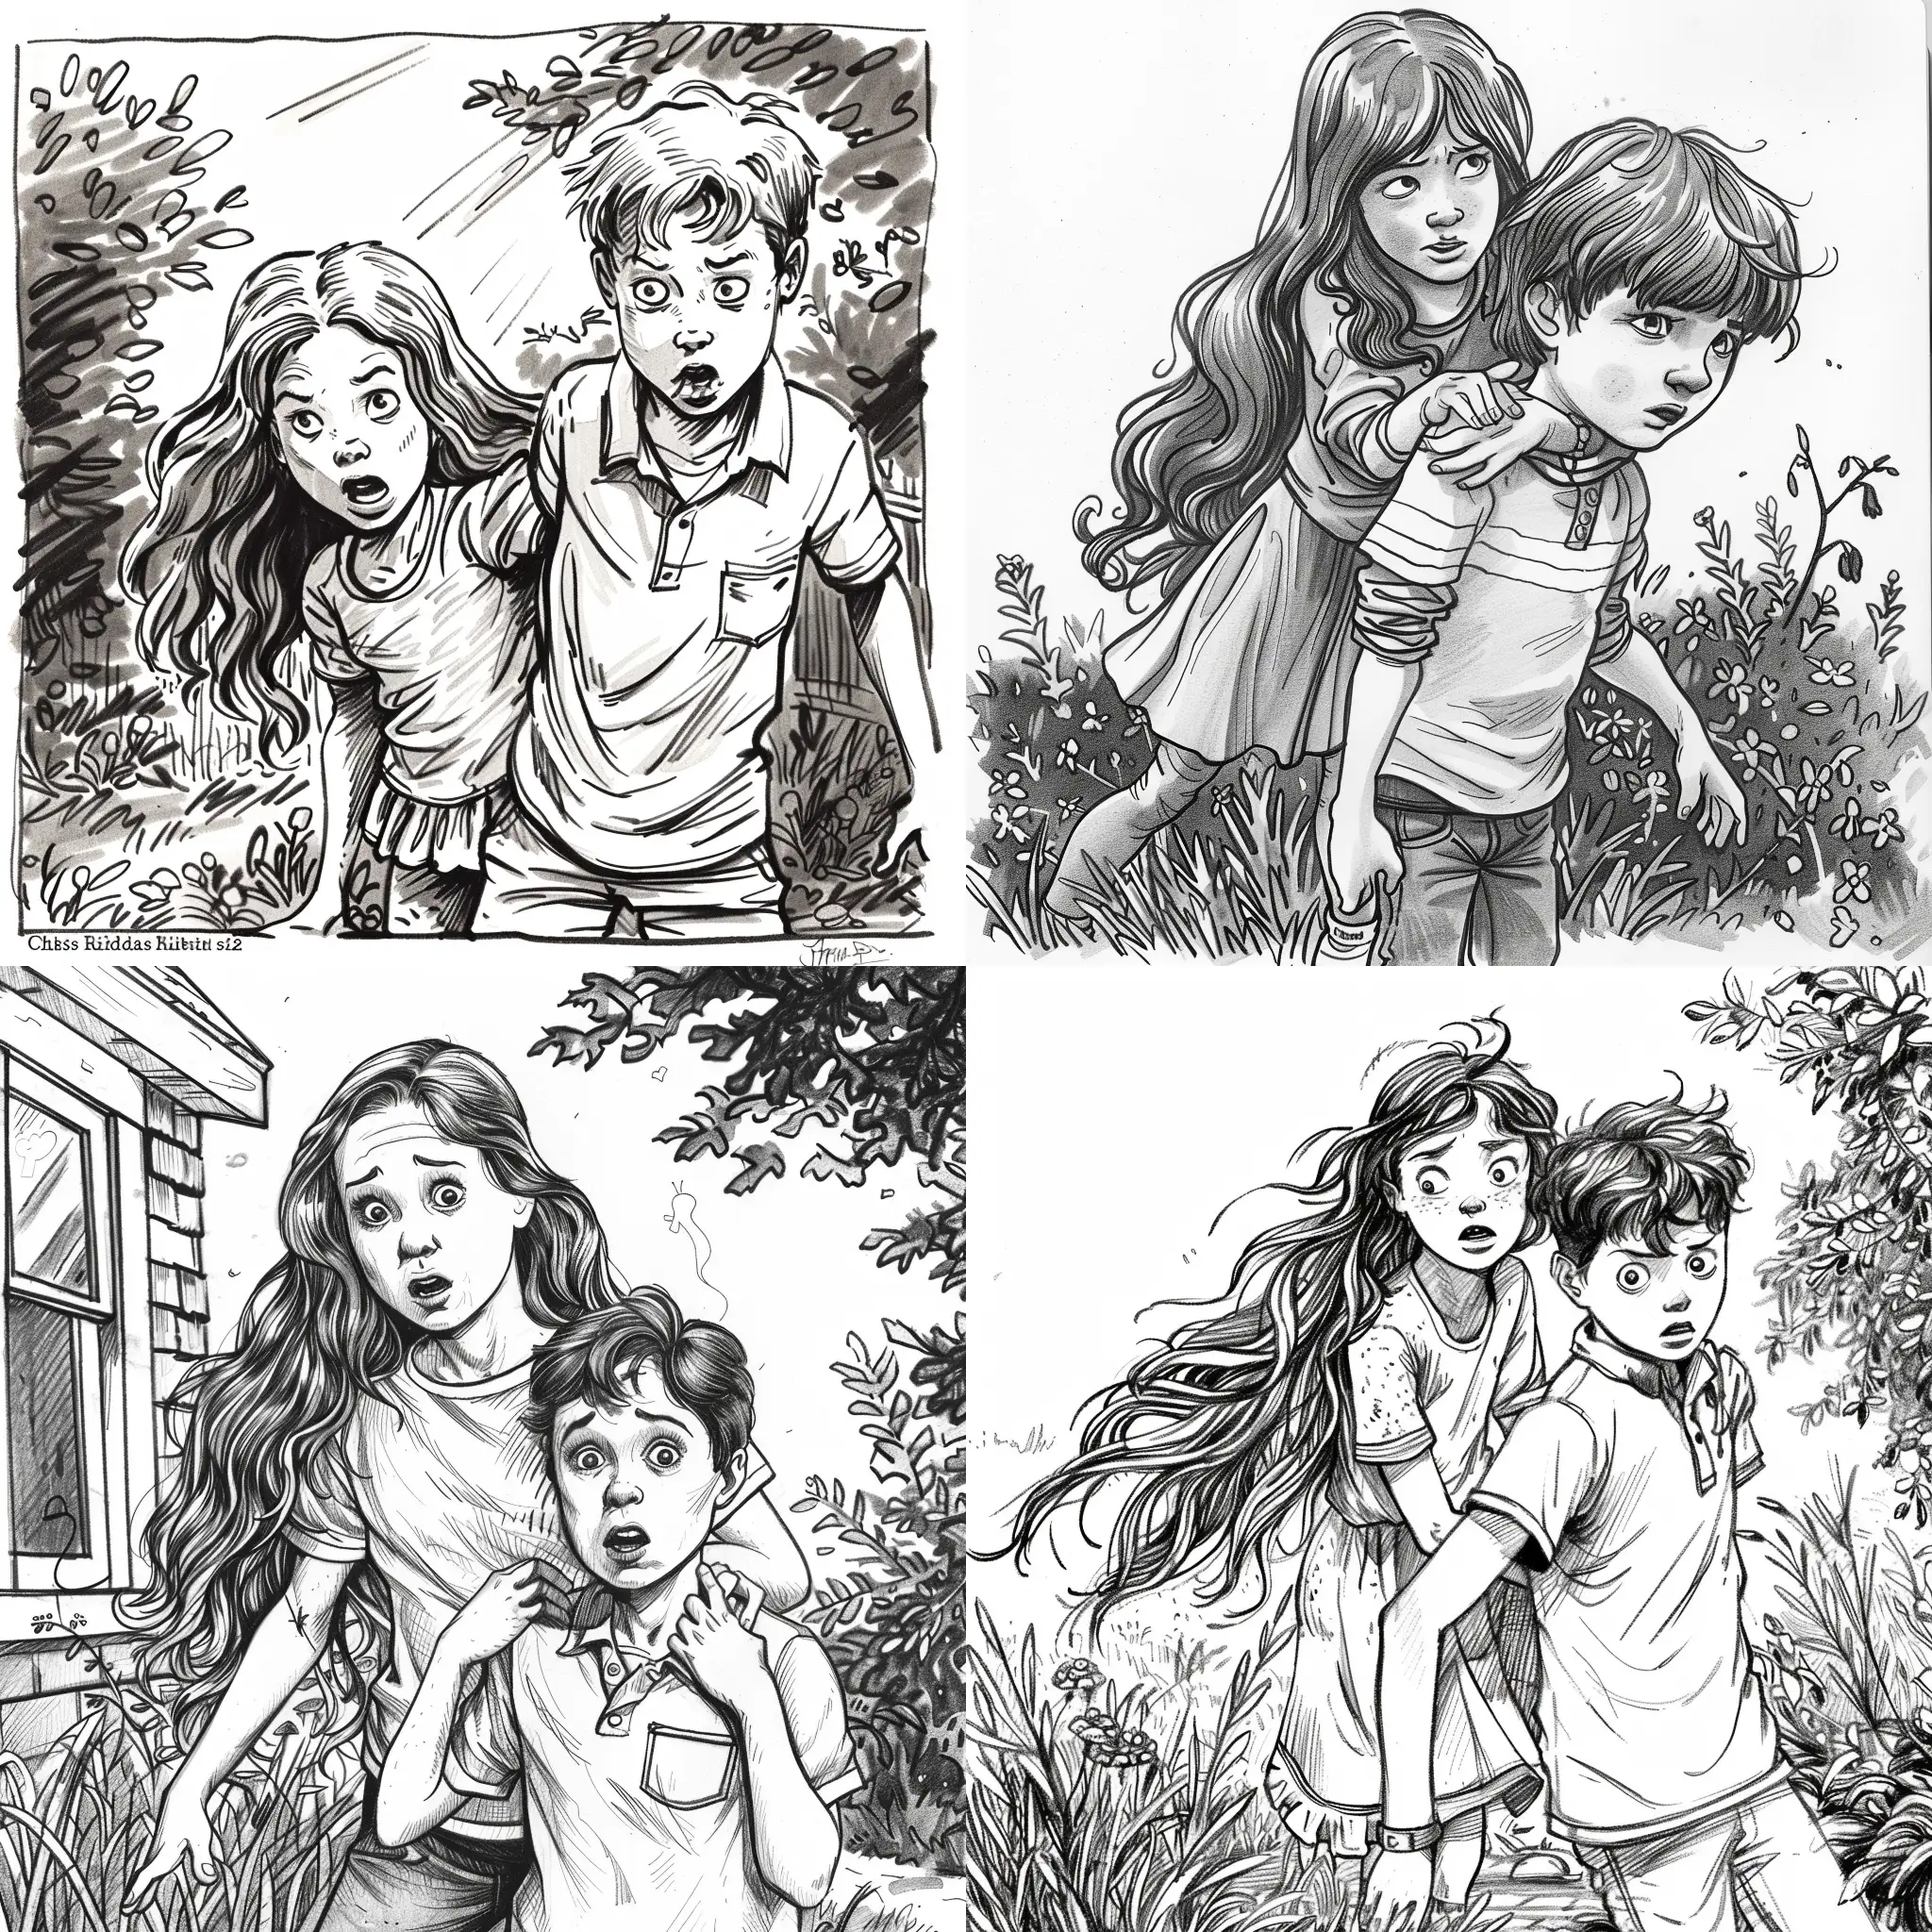 children's book illustration in black and white, stylised basic sketch of 10 year old girl with long wavy hair creeping up behind her brother about to grab his shoulders to scare him, boy is 12 and a little taller , characters stood in a garden, chris riddell style art